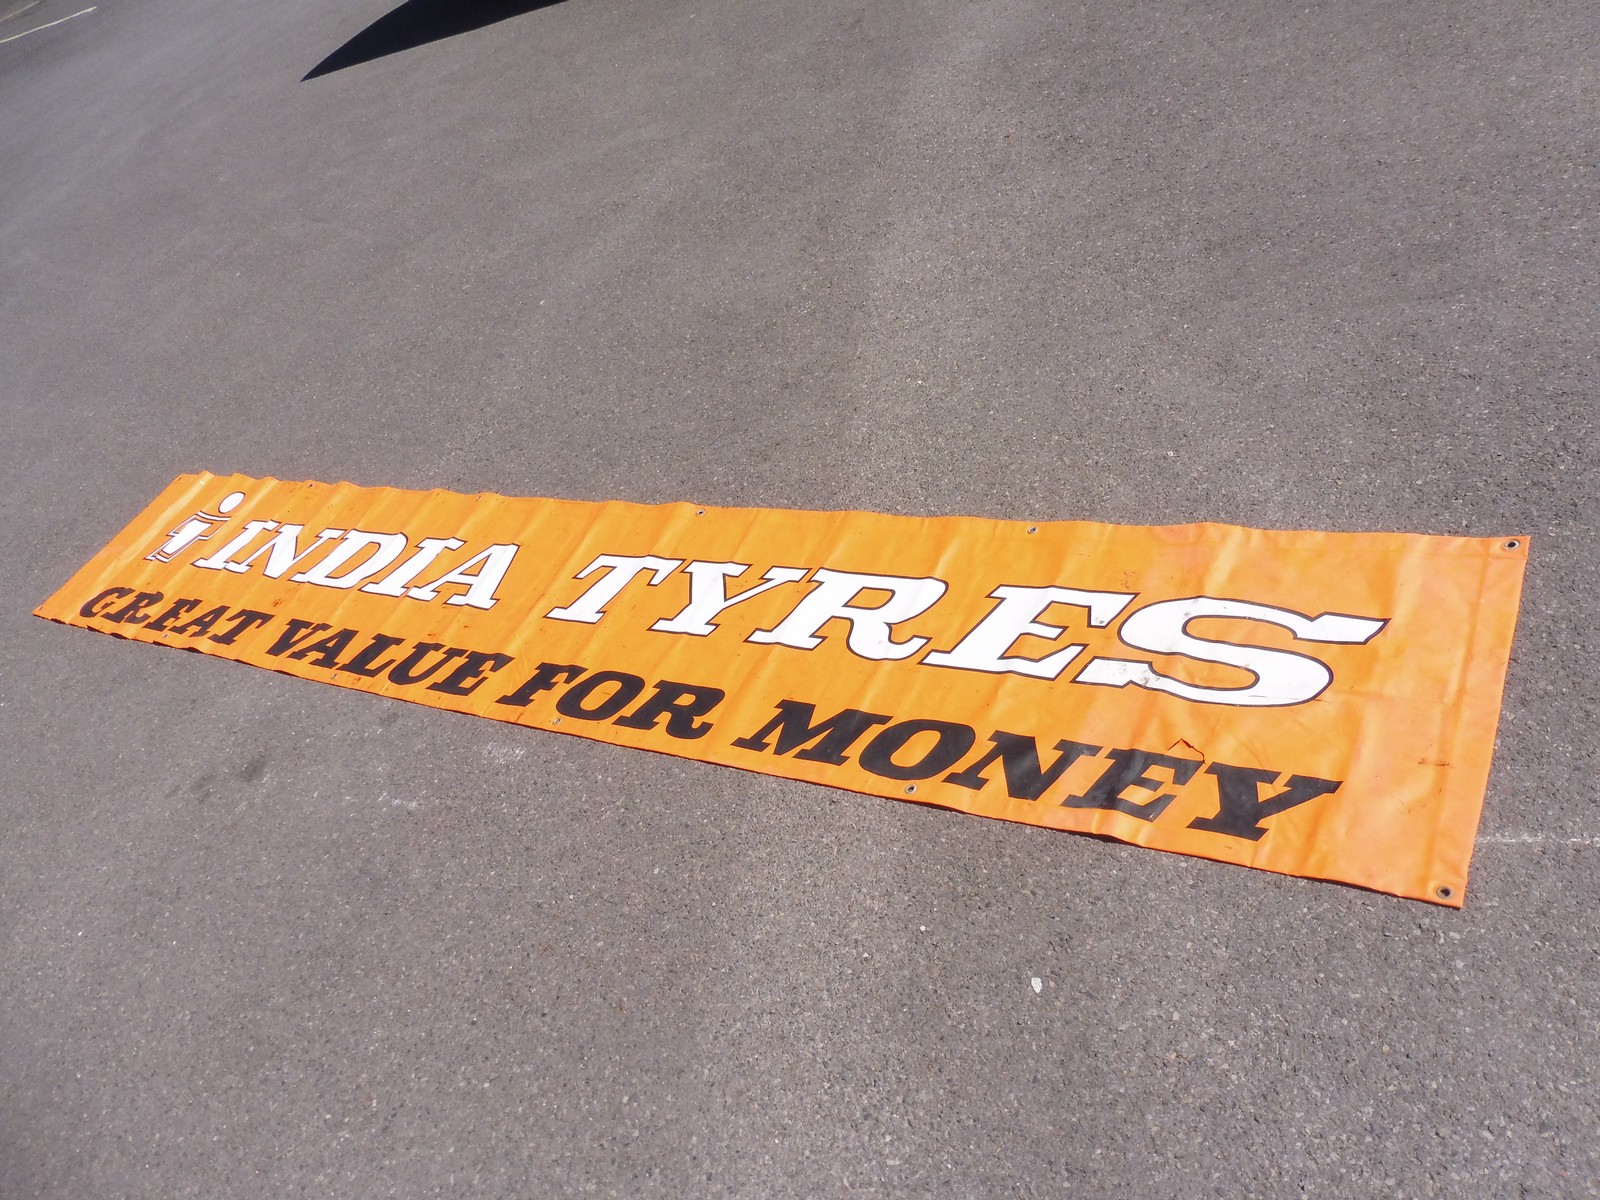 An India Tyres banner, 128 3/4 x 21 1/2".